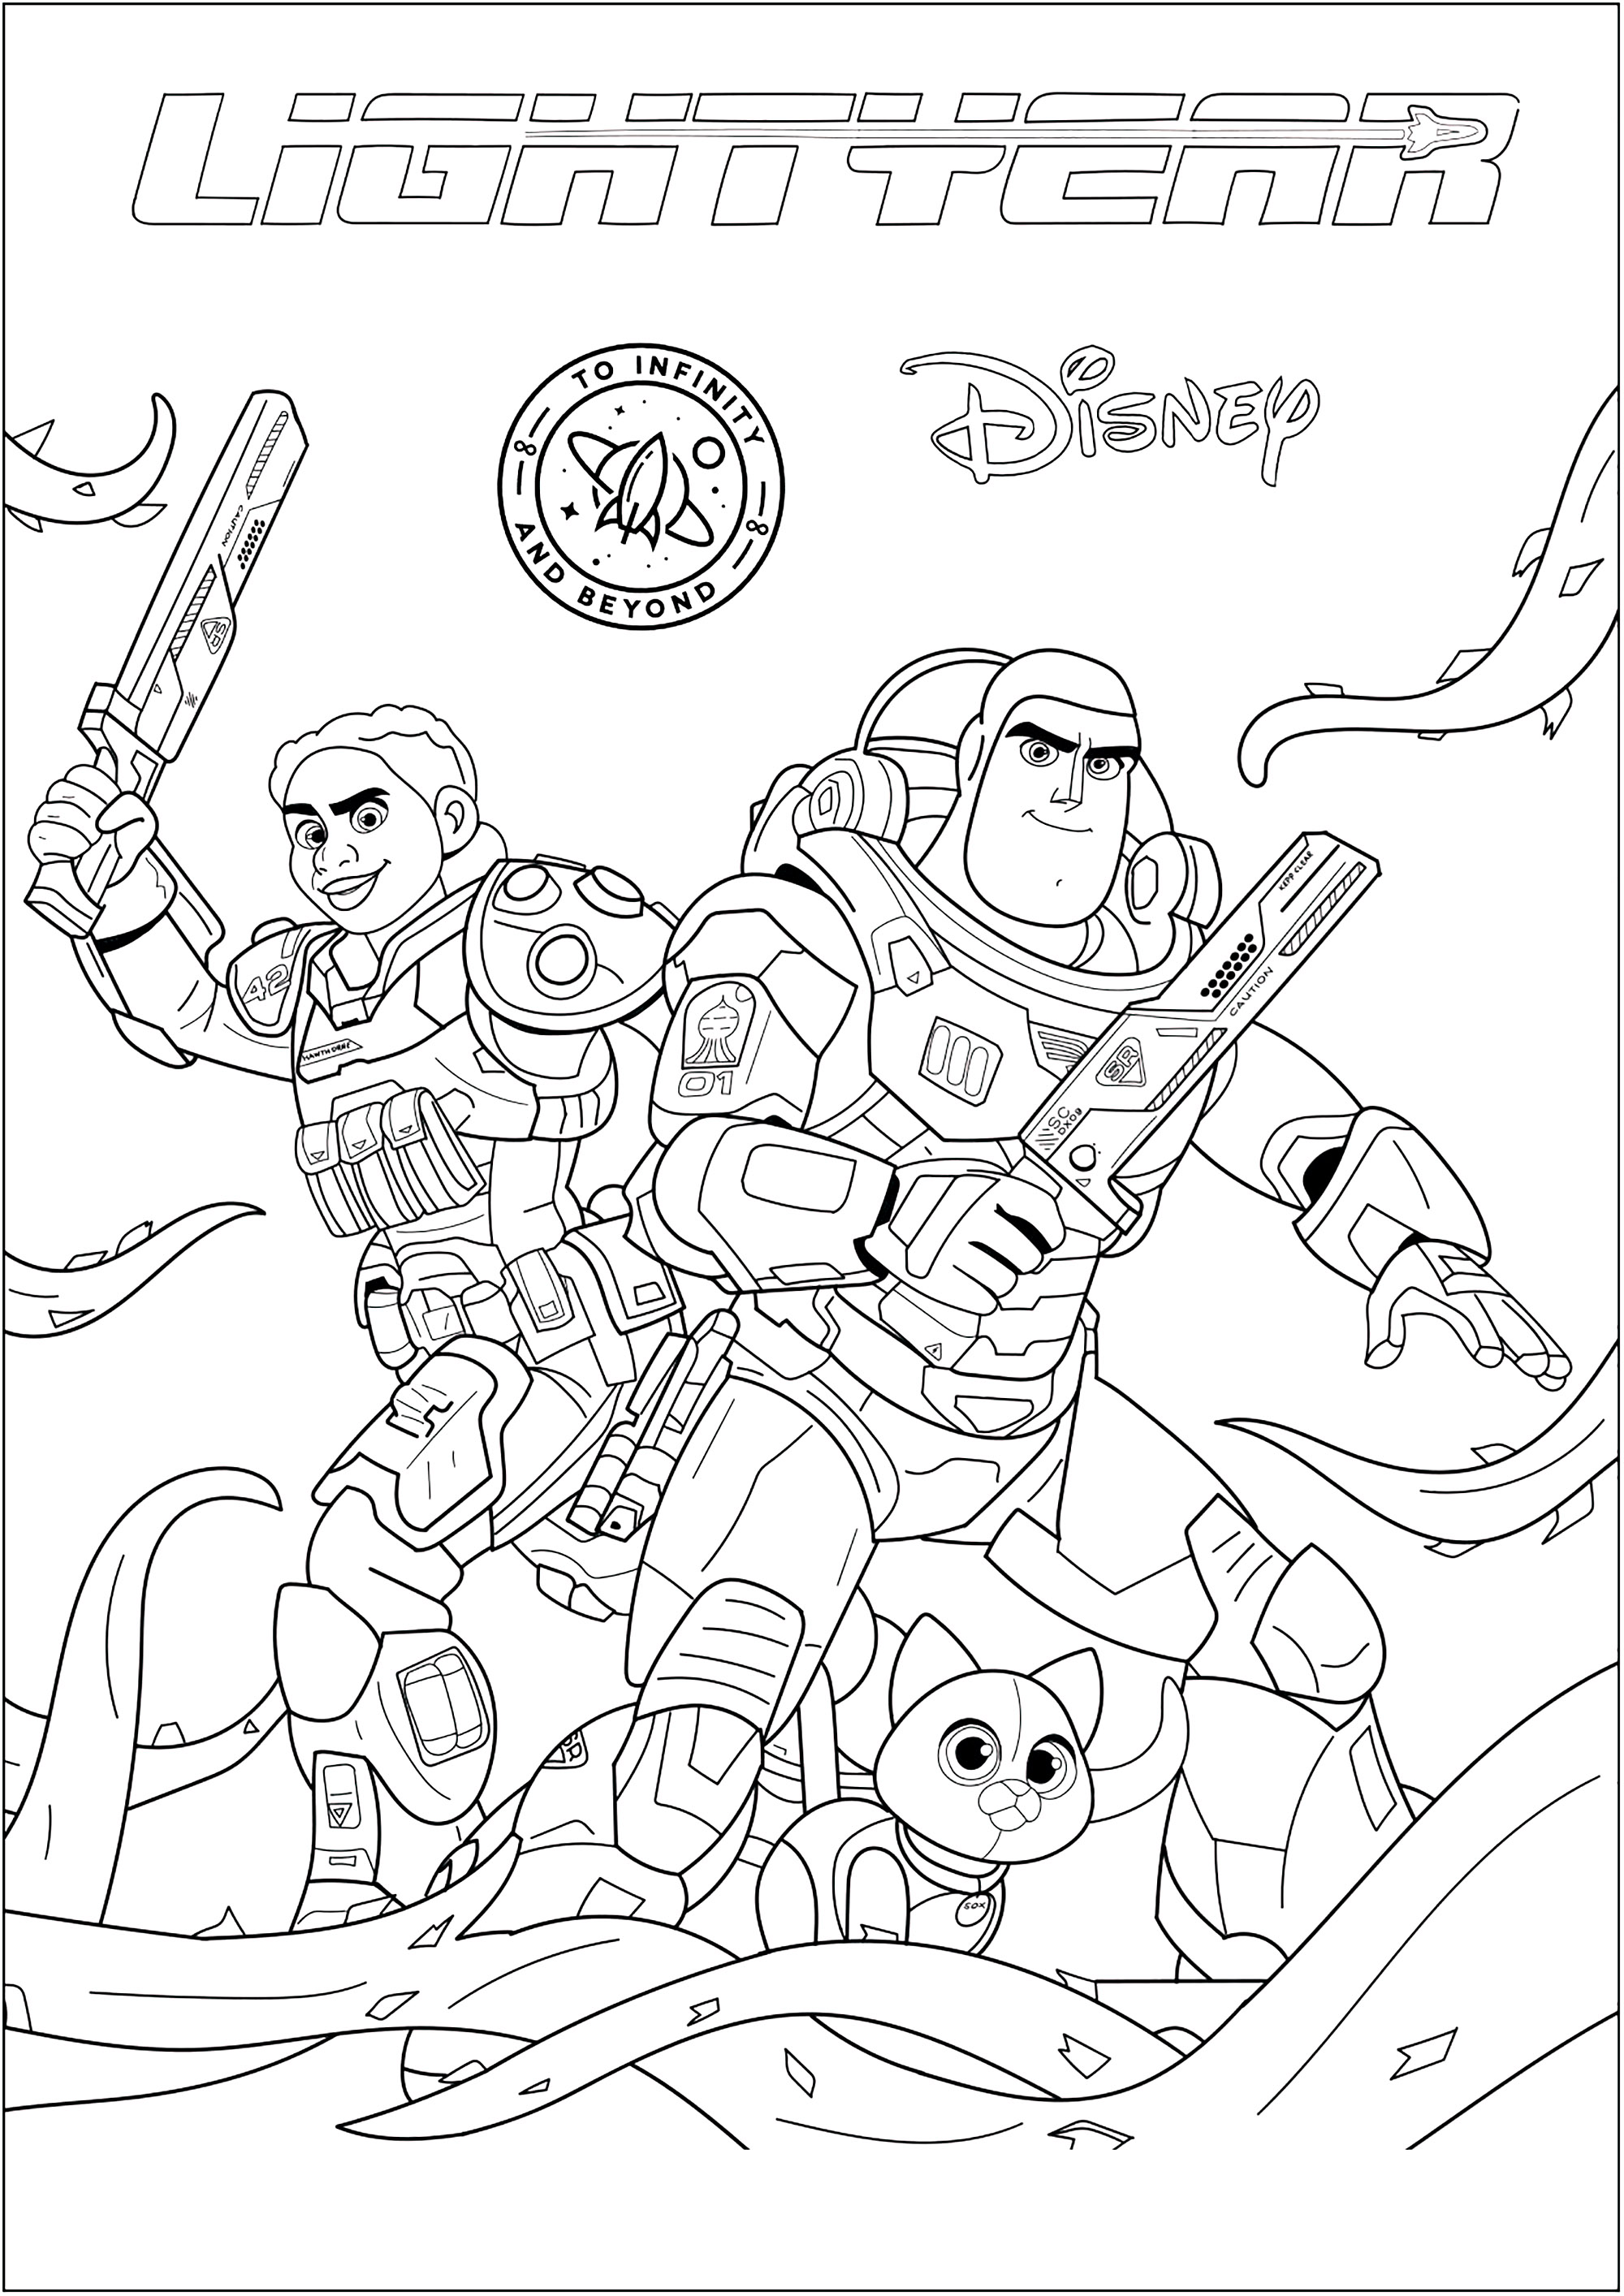 Coloring page with all the Lightyear characters, from Disney / Pixar